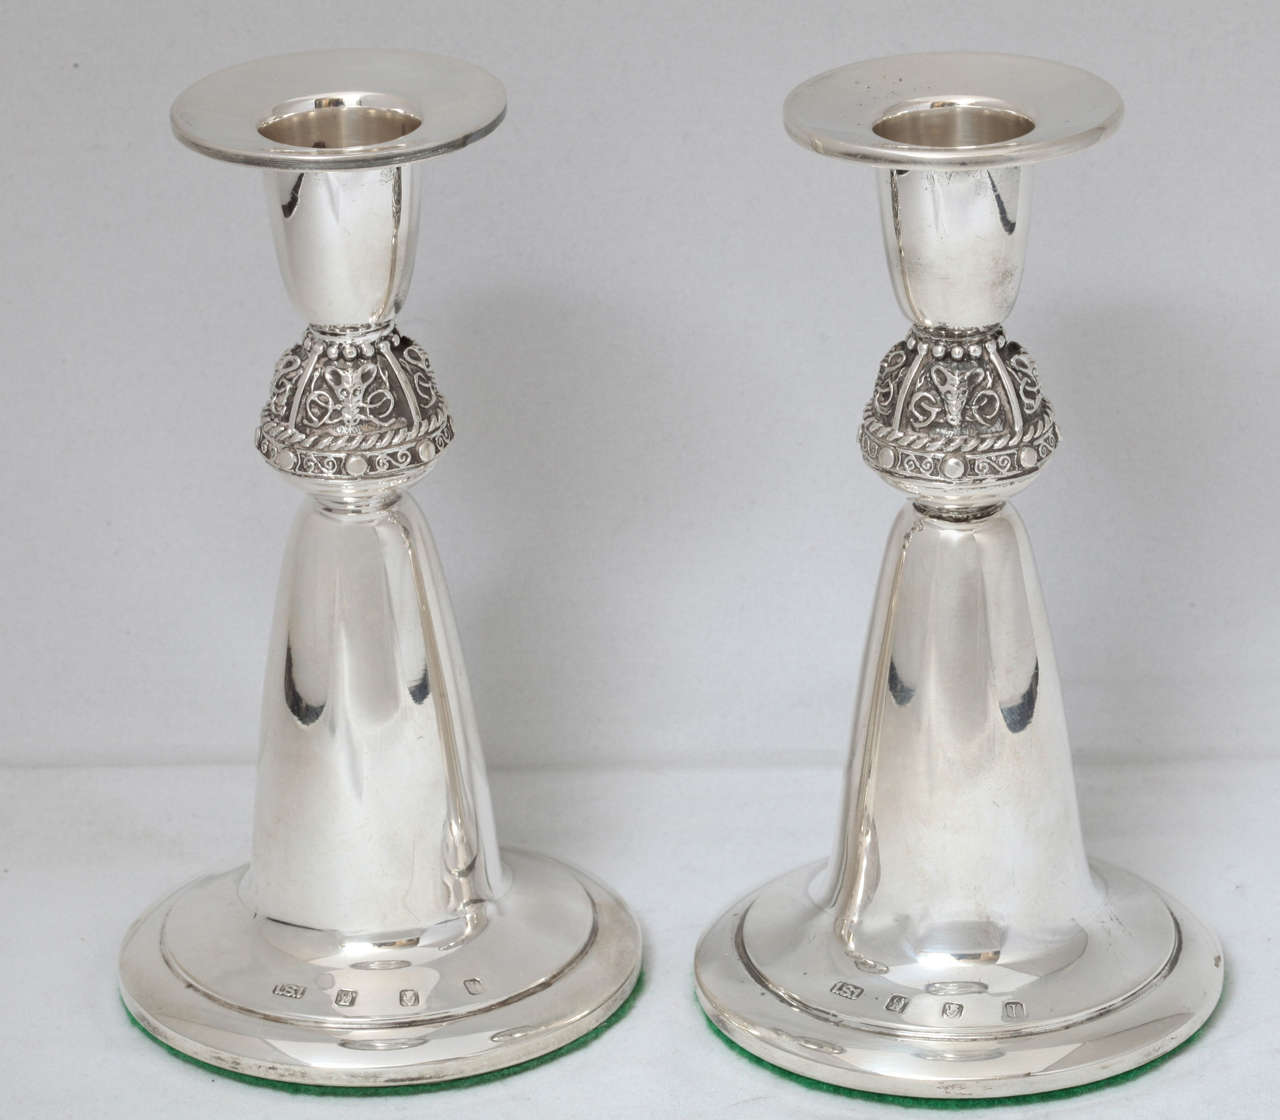 Pair of sterling silver candlesticks, Dublin, Ireland, 1977. Almost 5 3/4